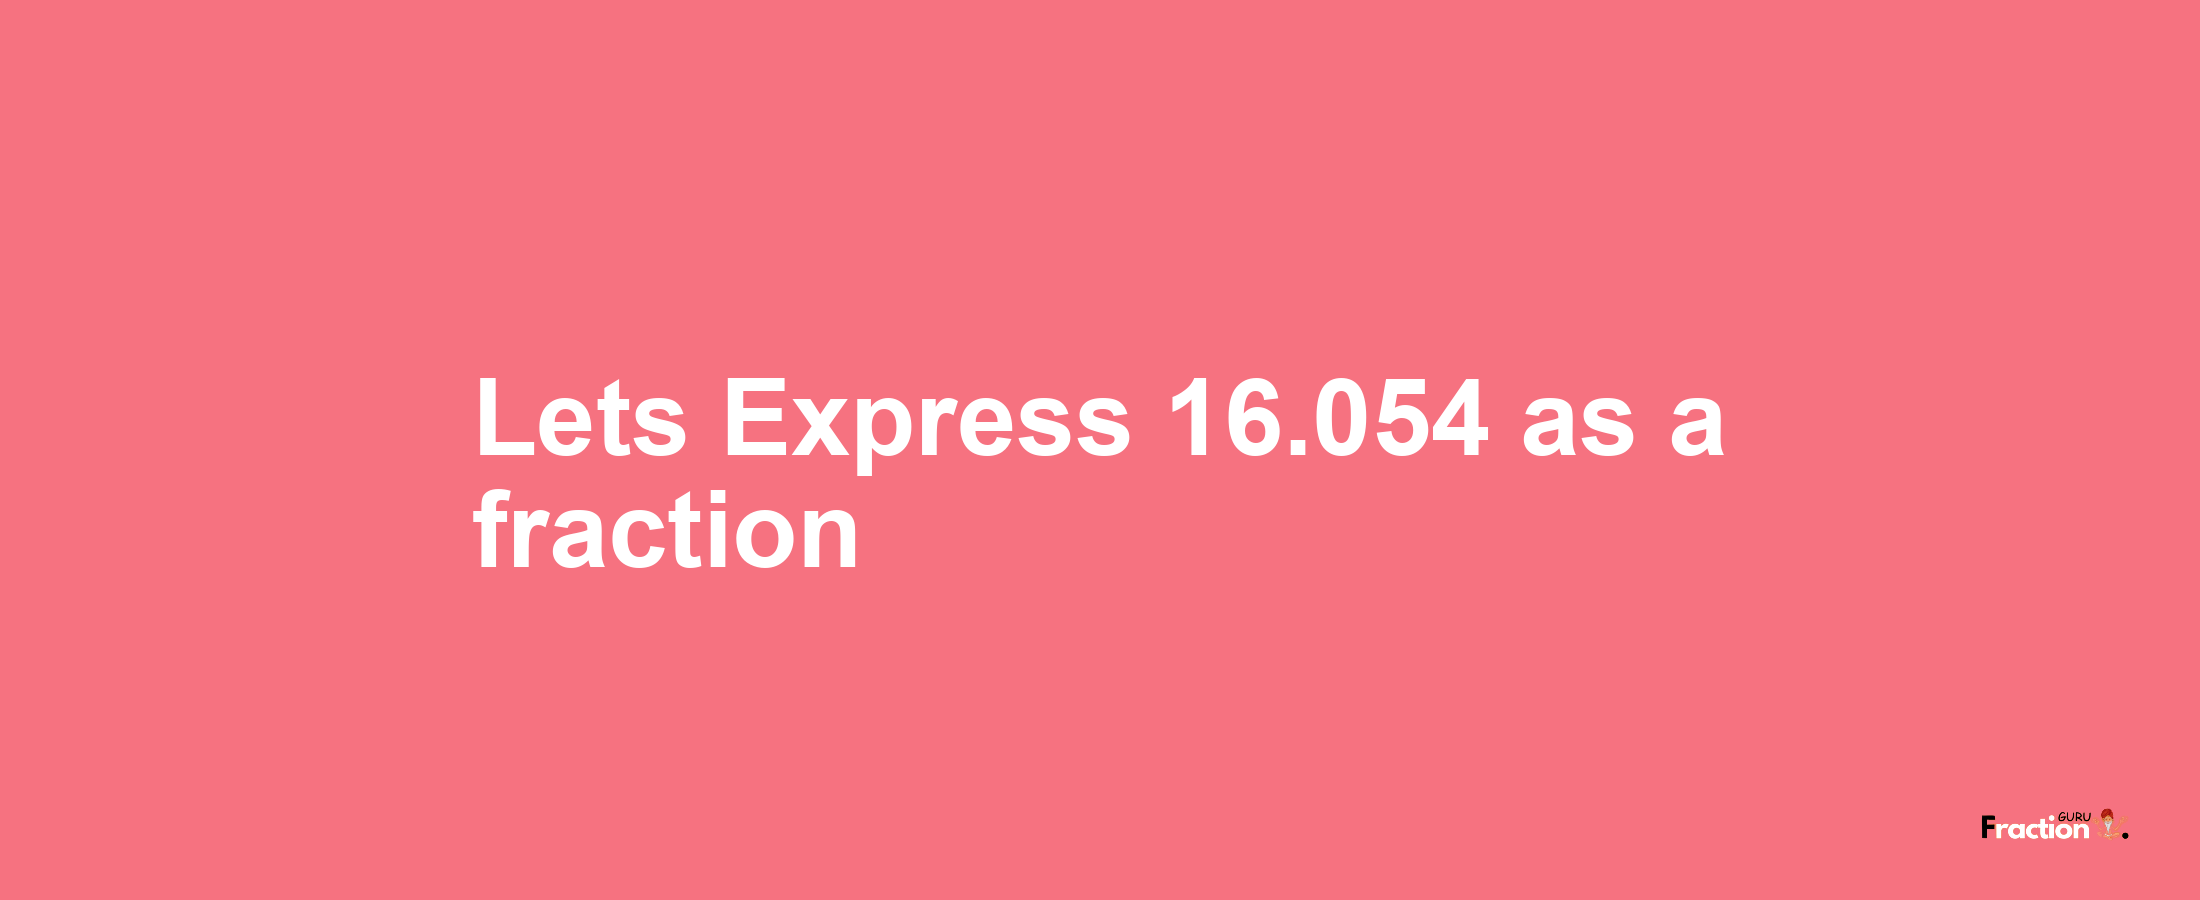 Lets Express 16.054 as afraction